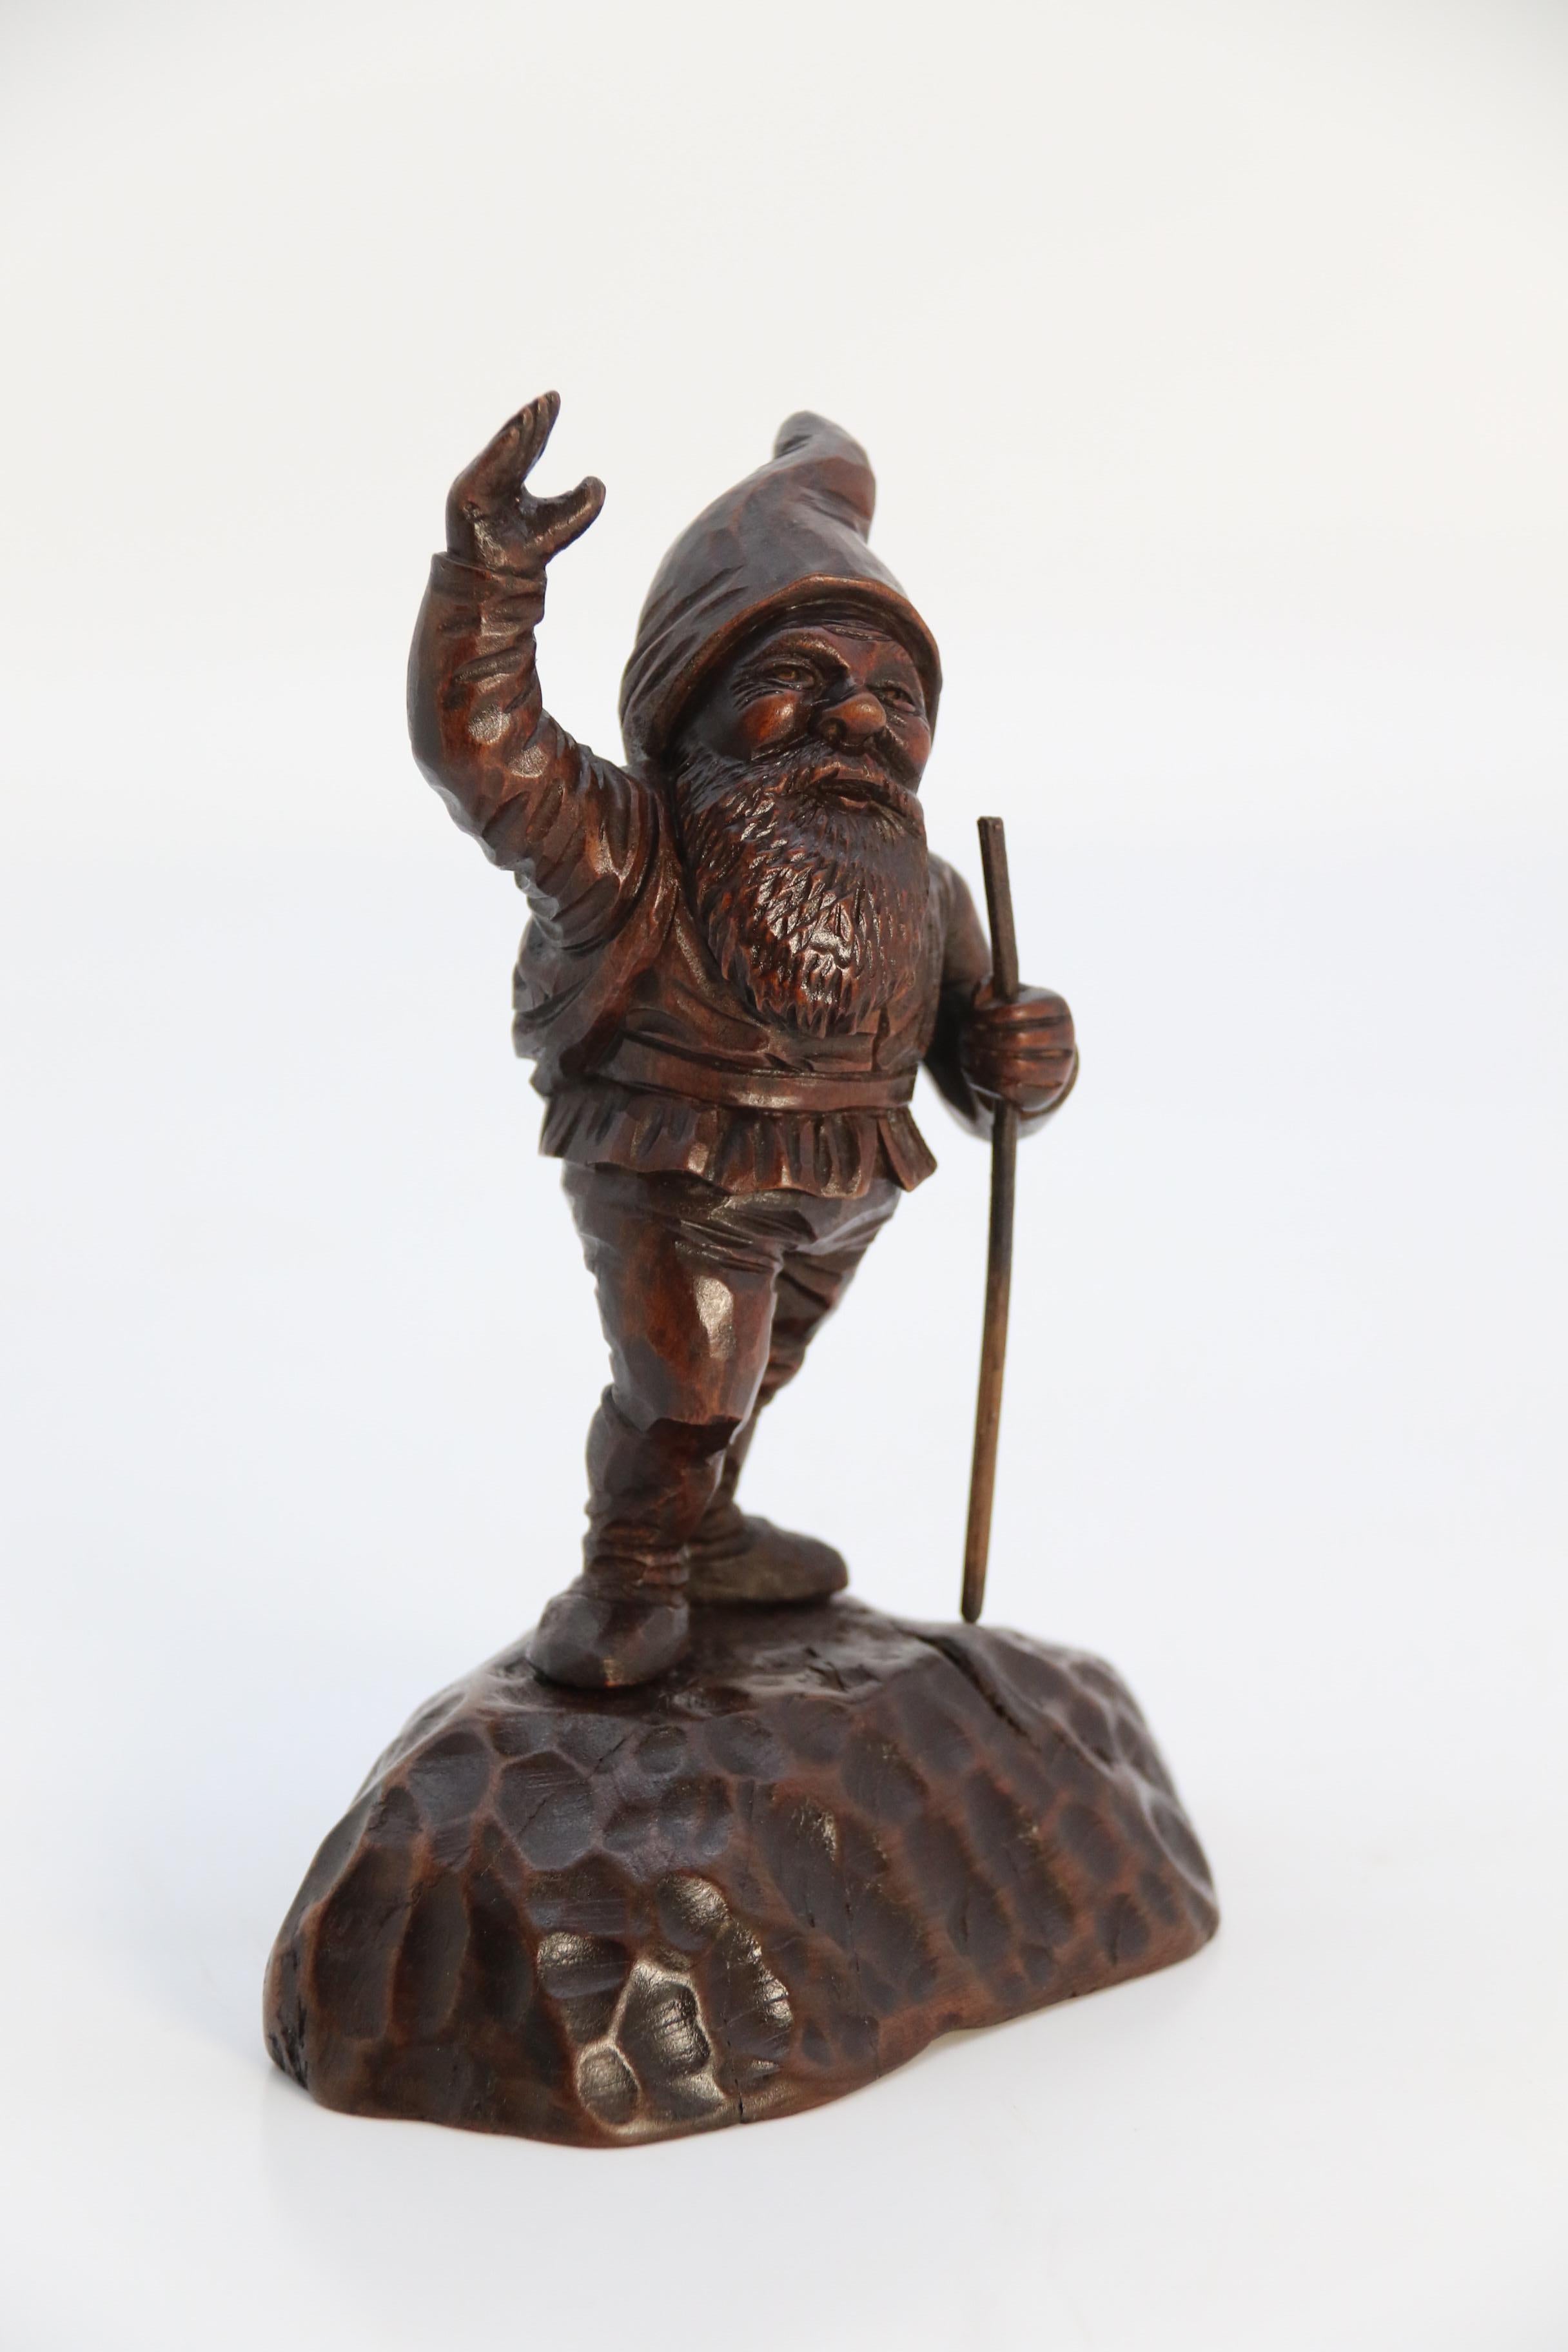 This jolly little chap is very pleasing. He is beautifully hand carved in walnut and was made at the end of 19th century in the Black Forest region of Germany or Switzerland. He is out walking with a stick in one hand and he has reached the top of a